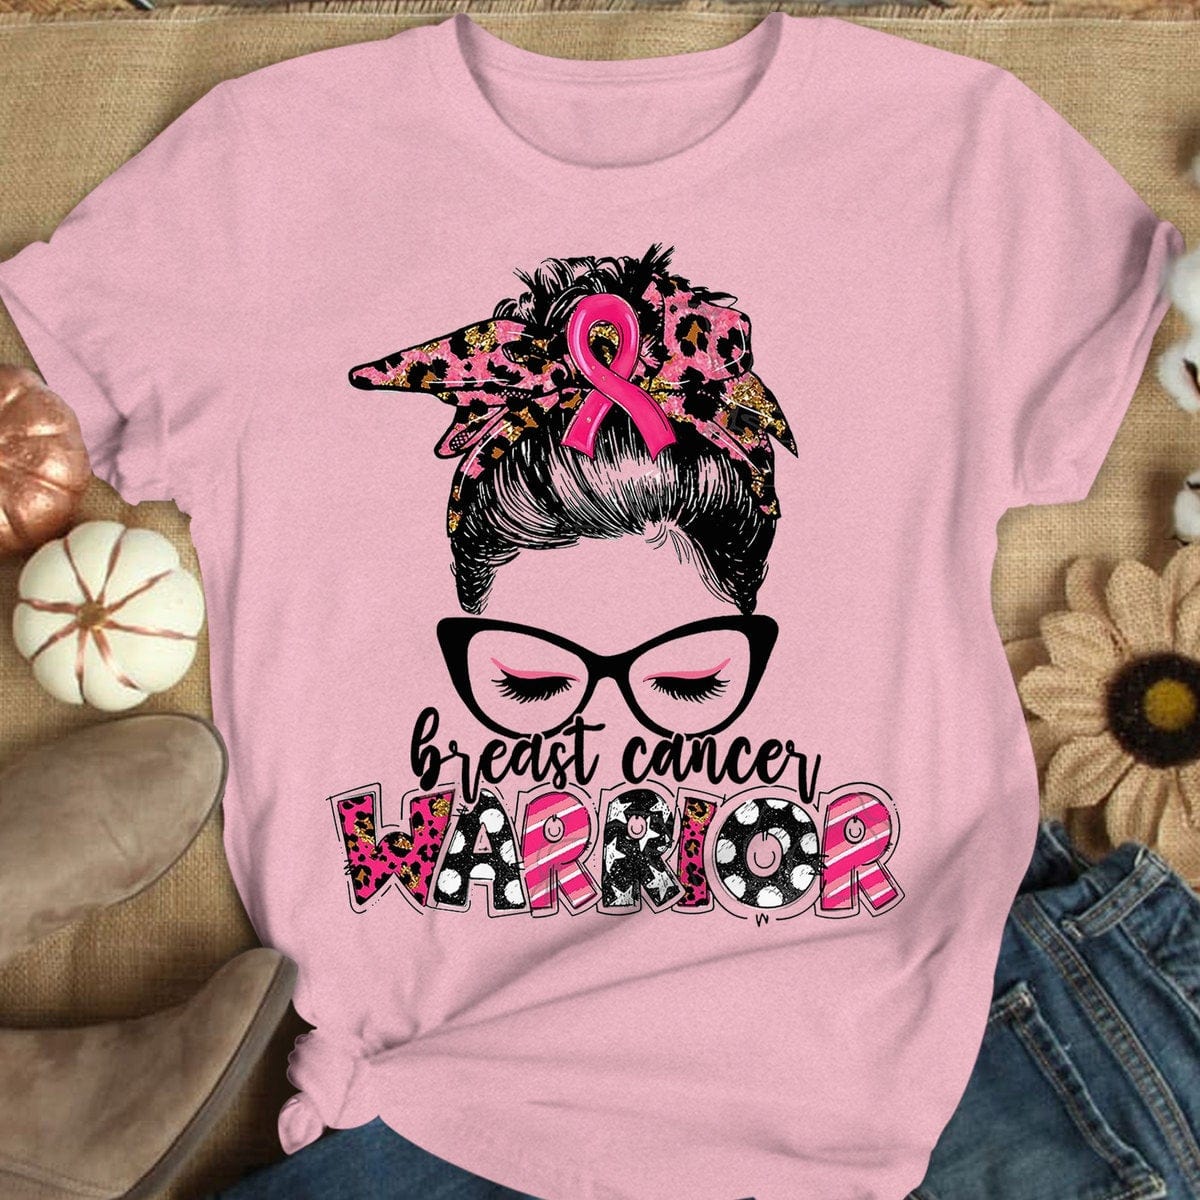 breast cancer awareness t-shirt design, the fighter girl breast